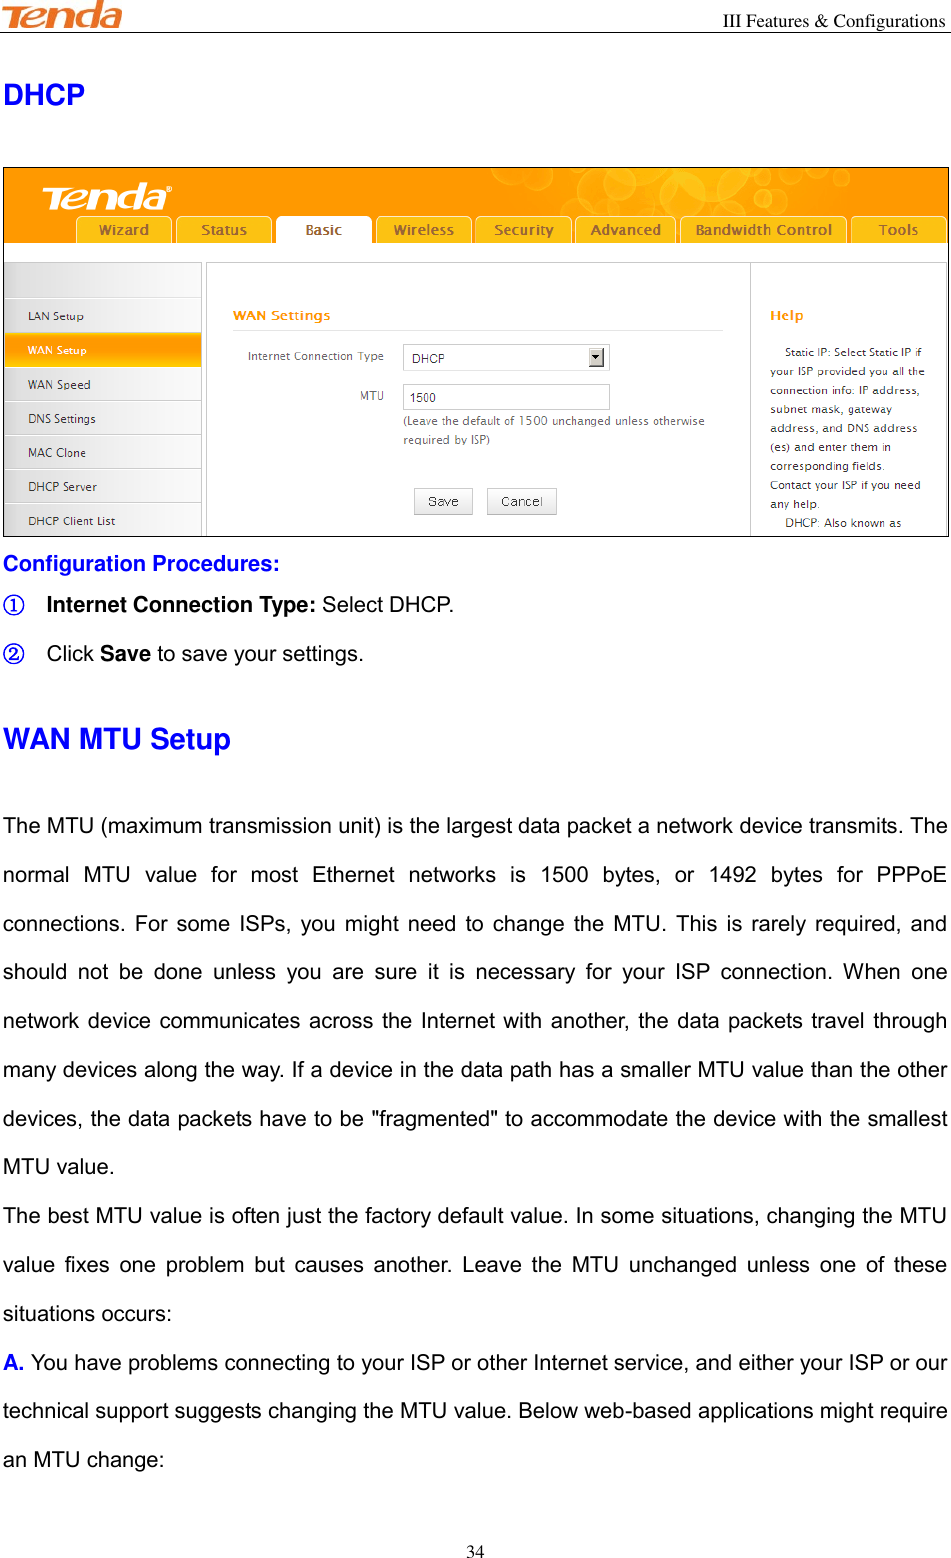                                                        III Features &amp; Configurations           34 DHCP  Configuration Procedures: ① Internet Connection Type: Select DHCP. ② Click Save to save your settings. WAN MTU Setup The MTU (maximum transmission unit) is the largest data packet a network device transmits. The normal  MTU  value  for  most  Ethernet  networks  is  1500  bytes,  or  1492  bytes  for  PPPoE connections.  For  some  ISPs,  you  might  need  to  change  the  MTU.  This  is  rarely  required,  and should  not  be  done  unless  you  are  sure  it  is  necessary  for  your  ISP  connection.  When  one network  device communicates across the Internet with another, the data packets travel through many devices along the way. If a device in the data path has a smaller MTU value than the other devices, the data packets have to be &quot;fragmented&quot; to accommodate the device with the smallest MTU value. The best MTU value is often just the factory default value. In some situations, changing the MTU value  fixes  one  problem  but  causes  another.  Leave  the  MTU  unchanged  unless  one  of  these situations occurs: A. You have problems connecting to your ISP or other Internet service, and either your ISP or our technical support suggests changing the MTU value. Below web-based applications might require an MTU change: 